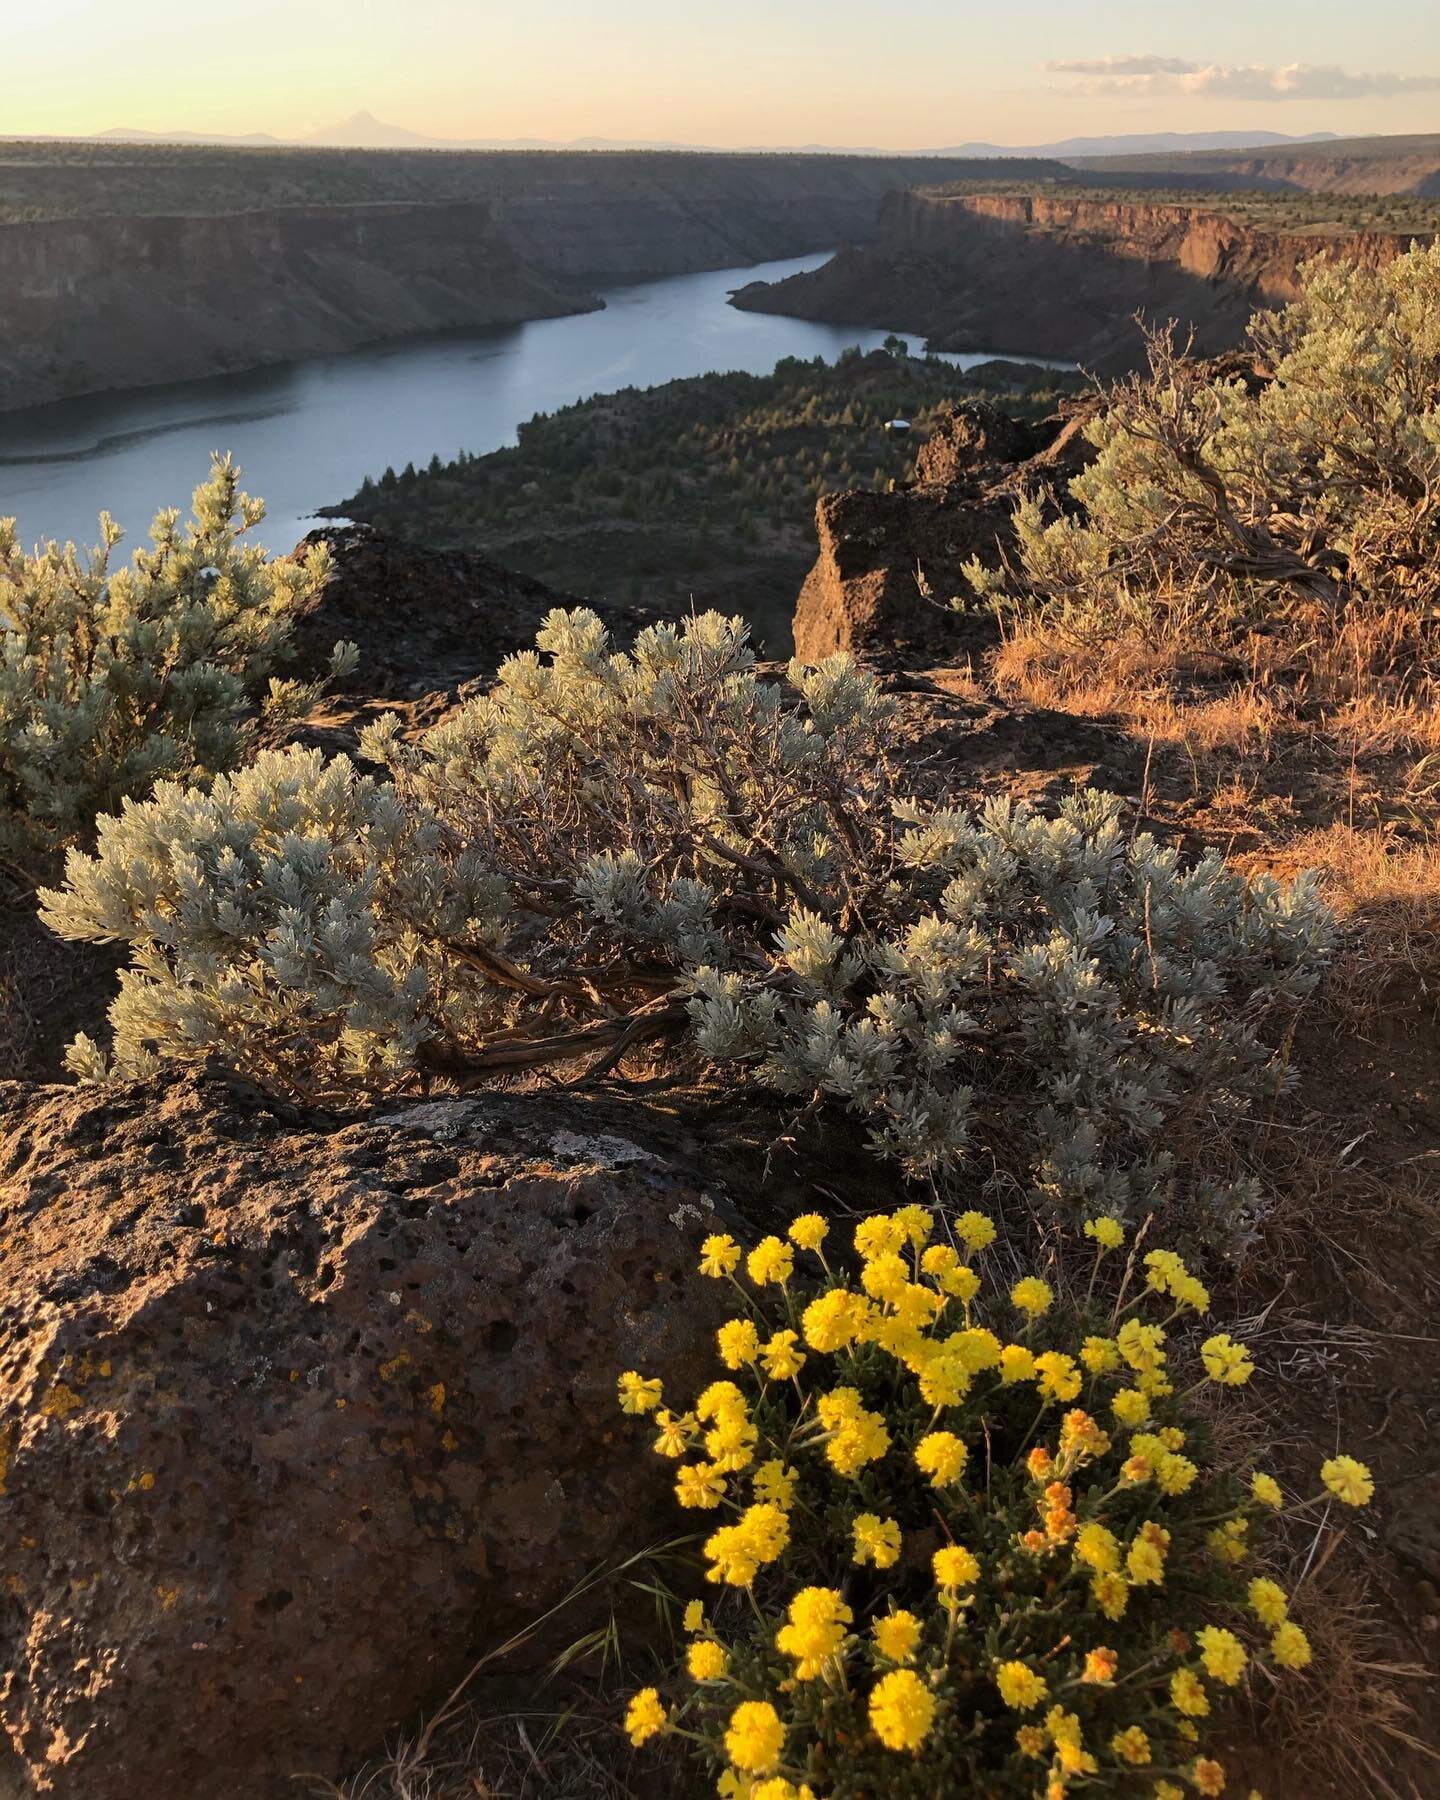 as I focus on wrapping up the writing + painting for the book, @vylettrentesept will be taking over my IG + documenting behind the scenes, more photos + stories to come! 

here&rsquo;s a pic from a recent hike in the Cove Palisades
.
.
.
.
.
#oregonl